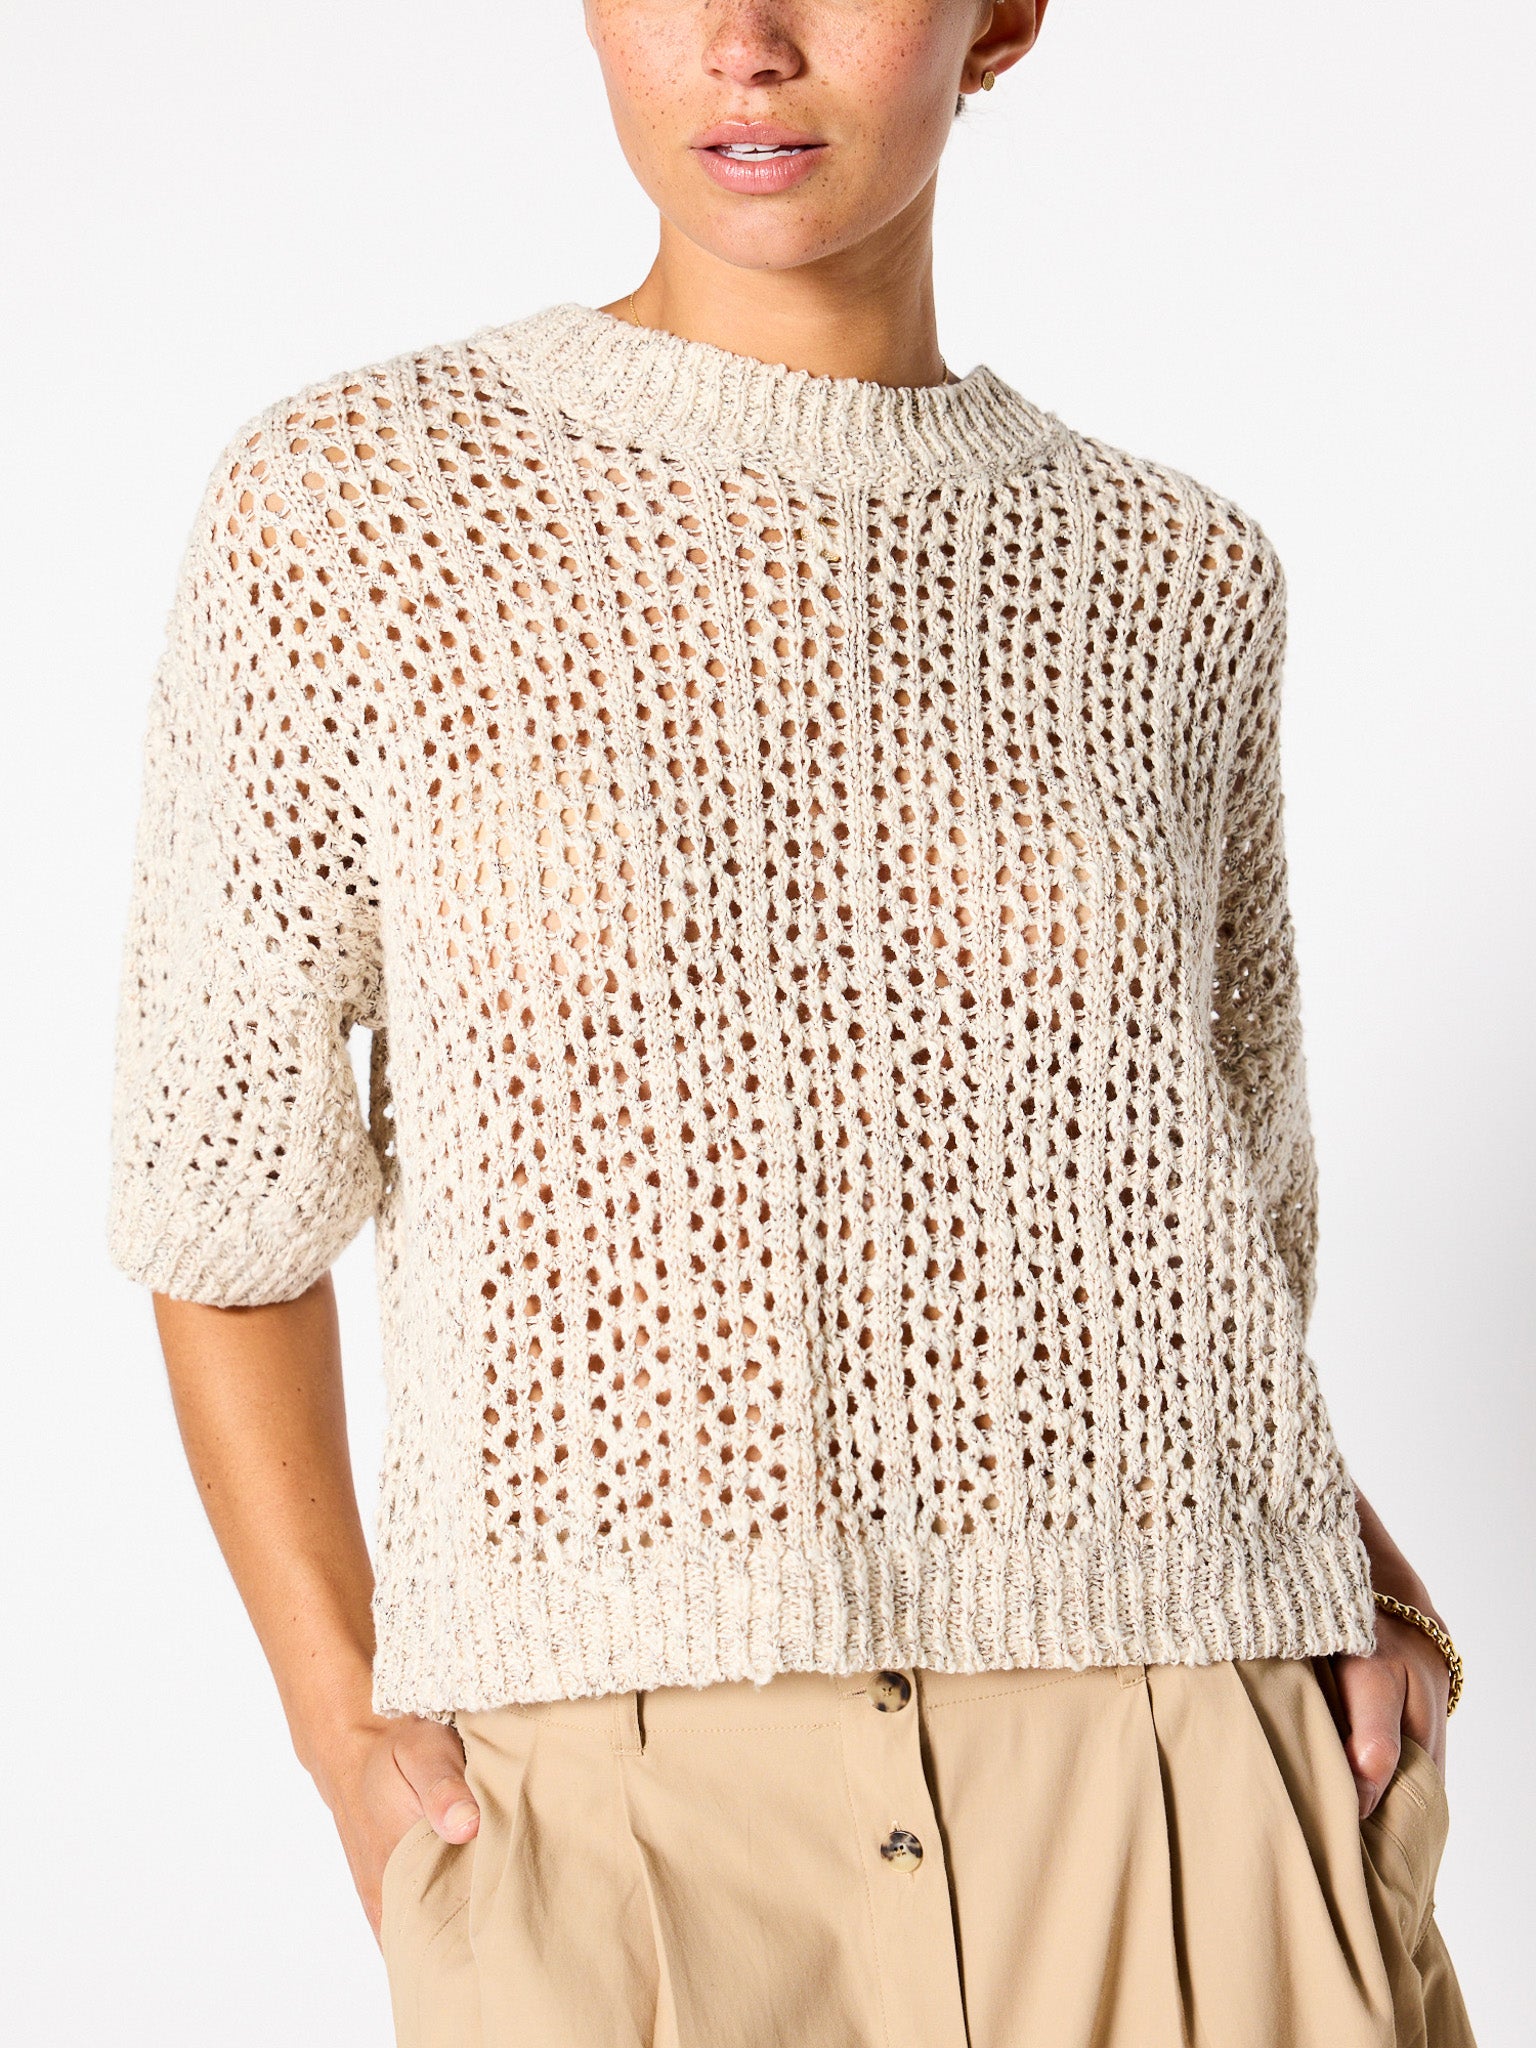 Sila eyelet linen beige top front view 2